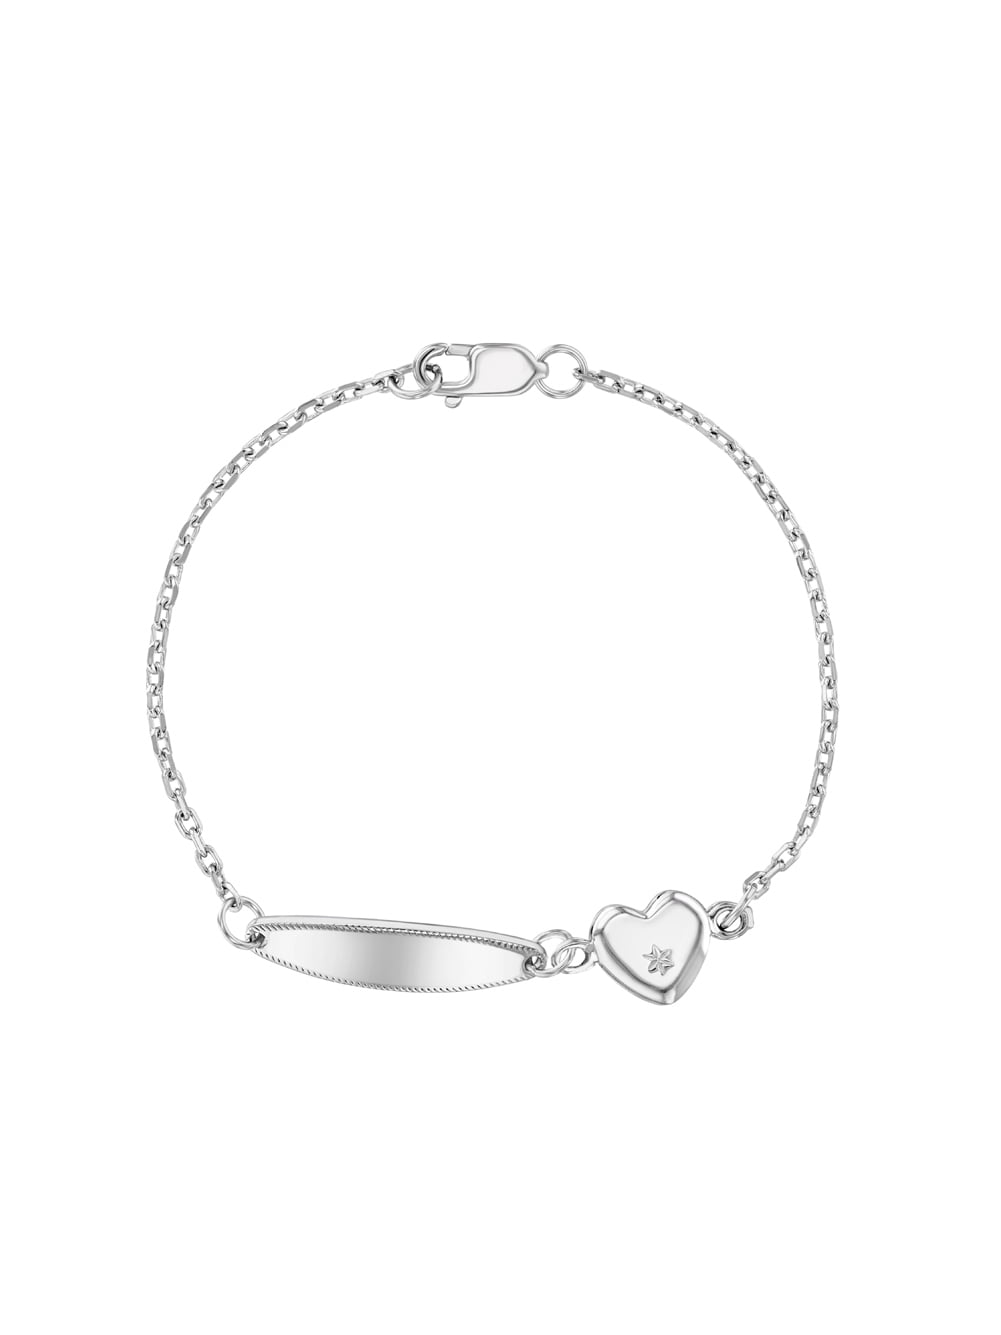 925 STERLING SILVER BABY CHILD ENGRAVED IDENTITY BRACELET ENGRAVING BEST PRICE 